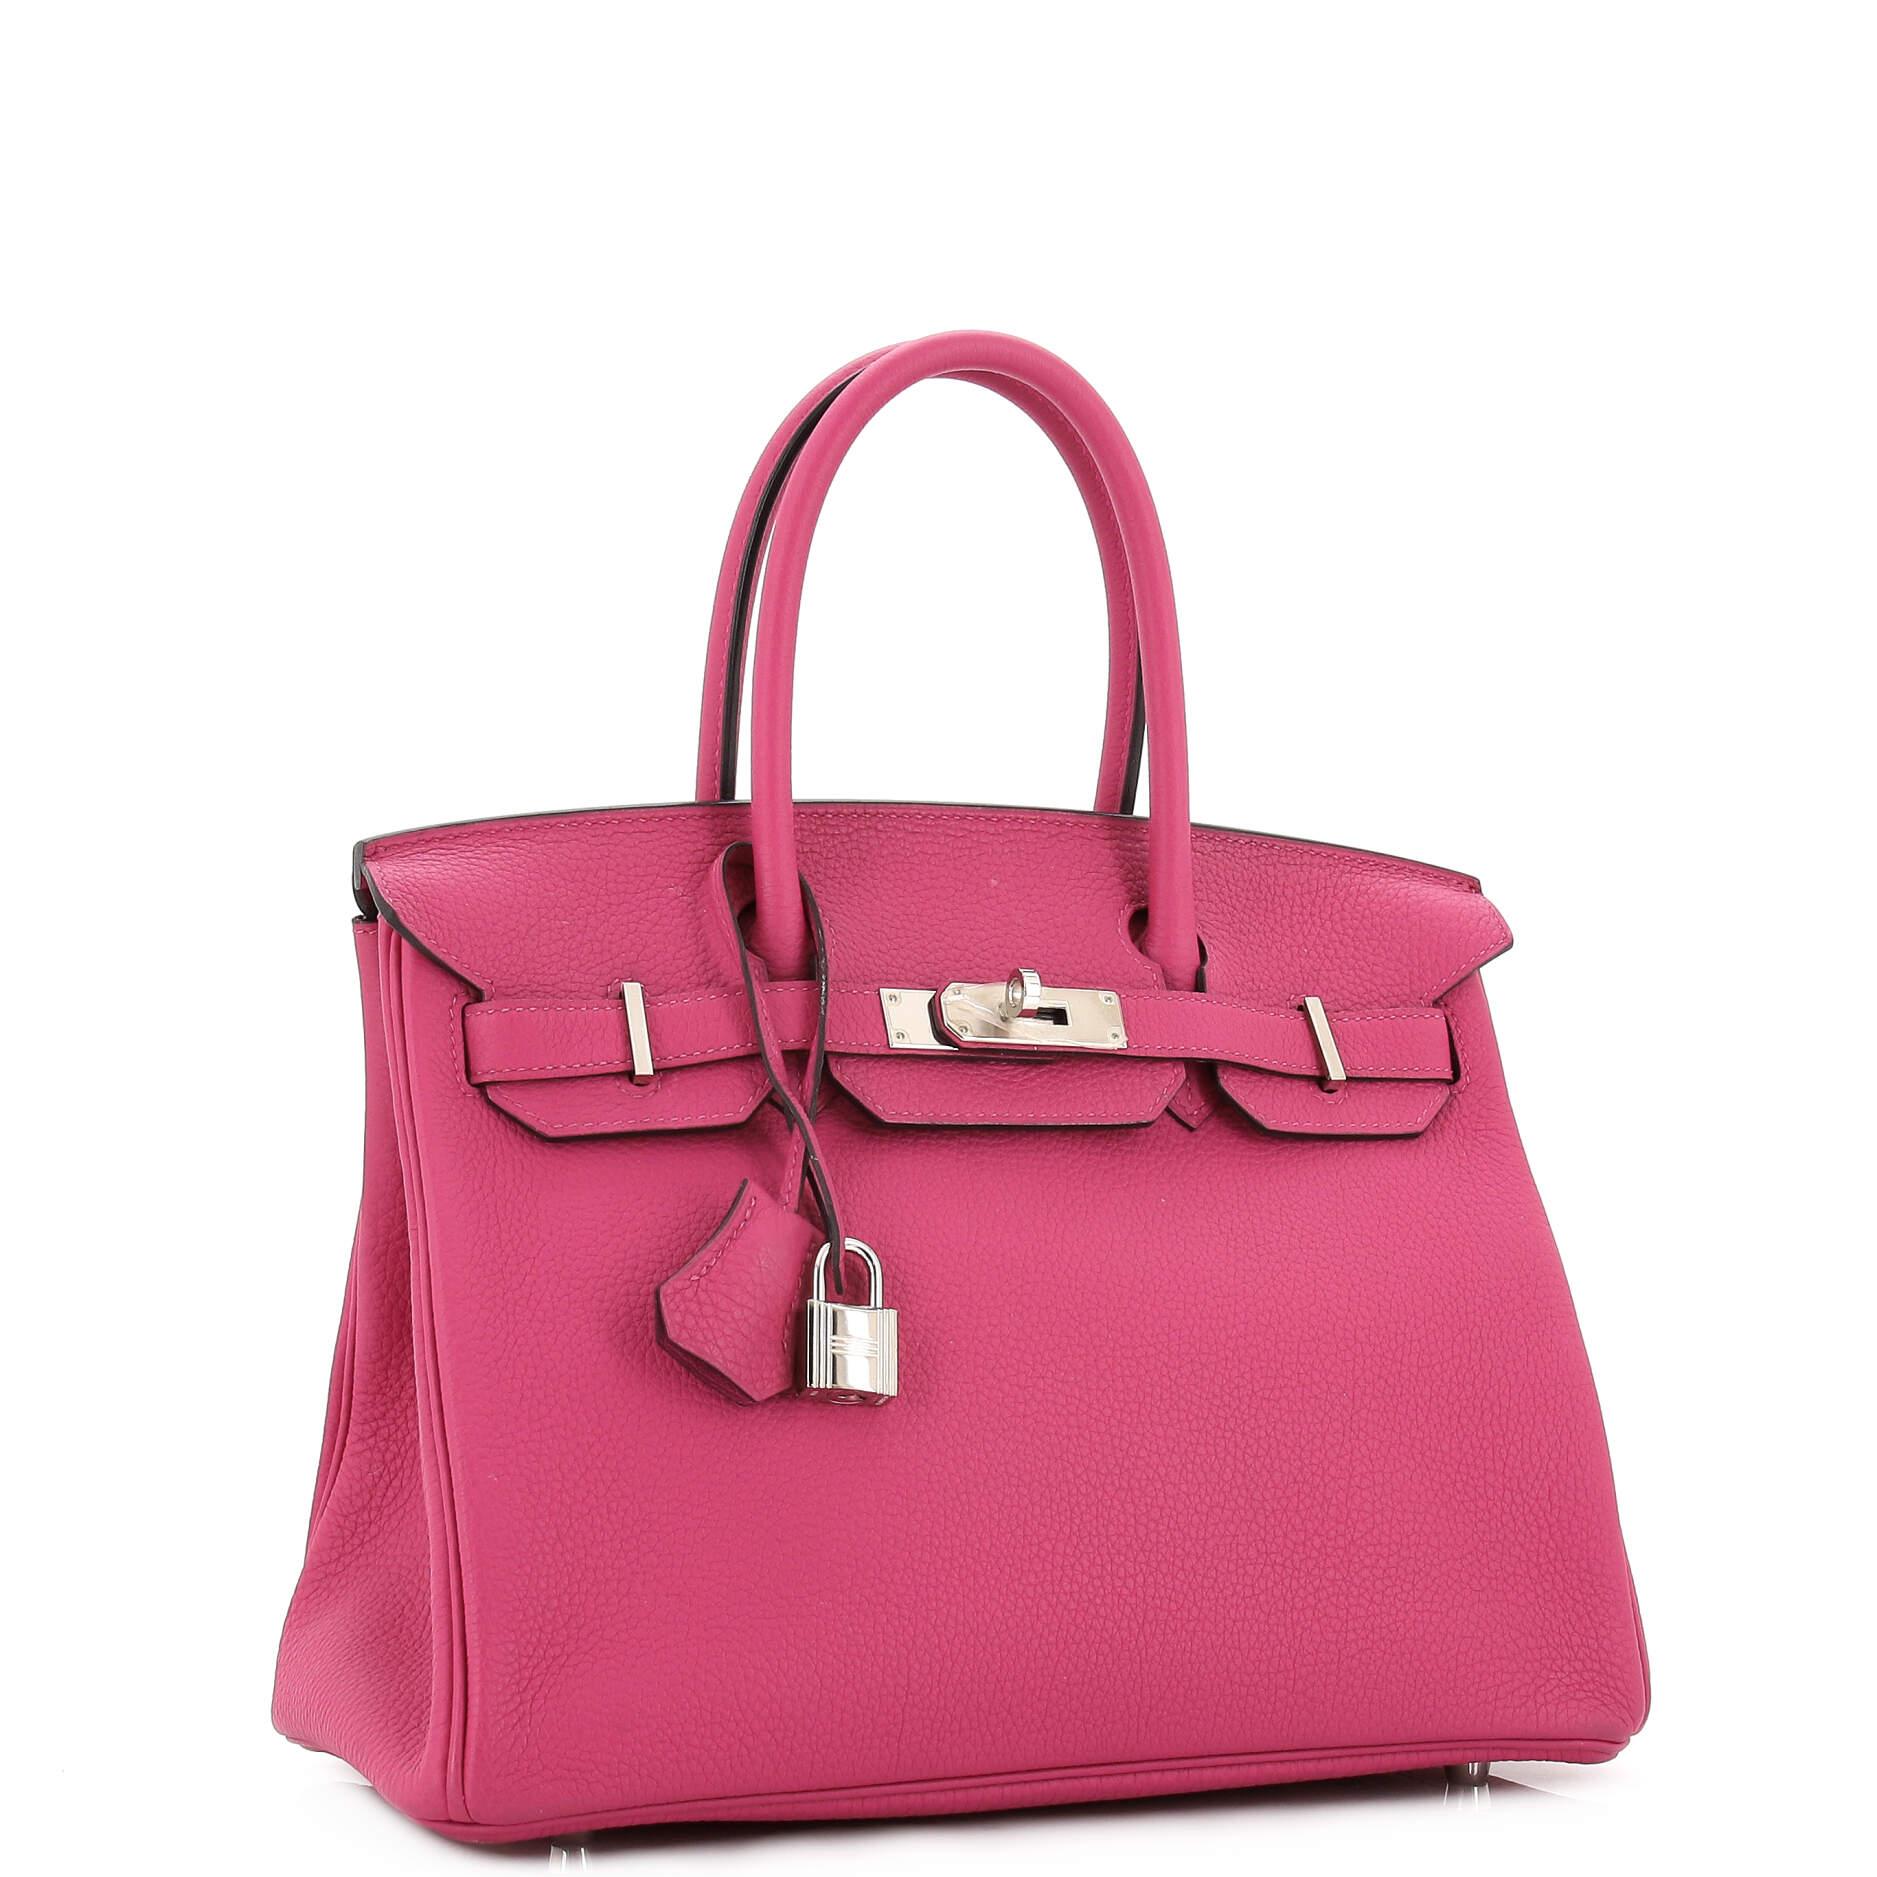 Hermes Birkin Handbag Rose Pourpre Togo with Palladium Hardware 30 In Good Condition For Sale In NY, NY